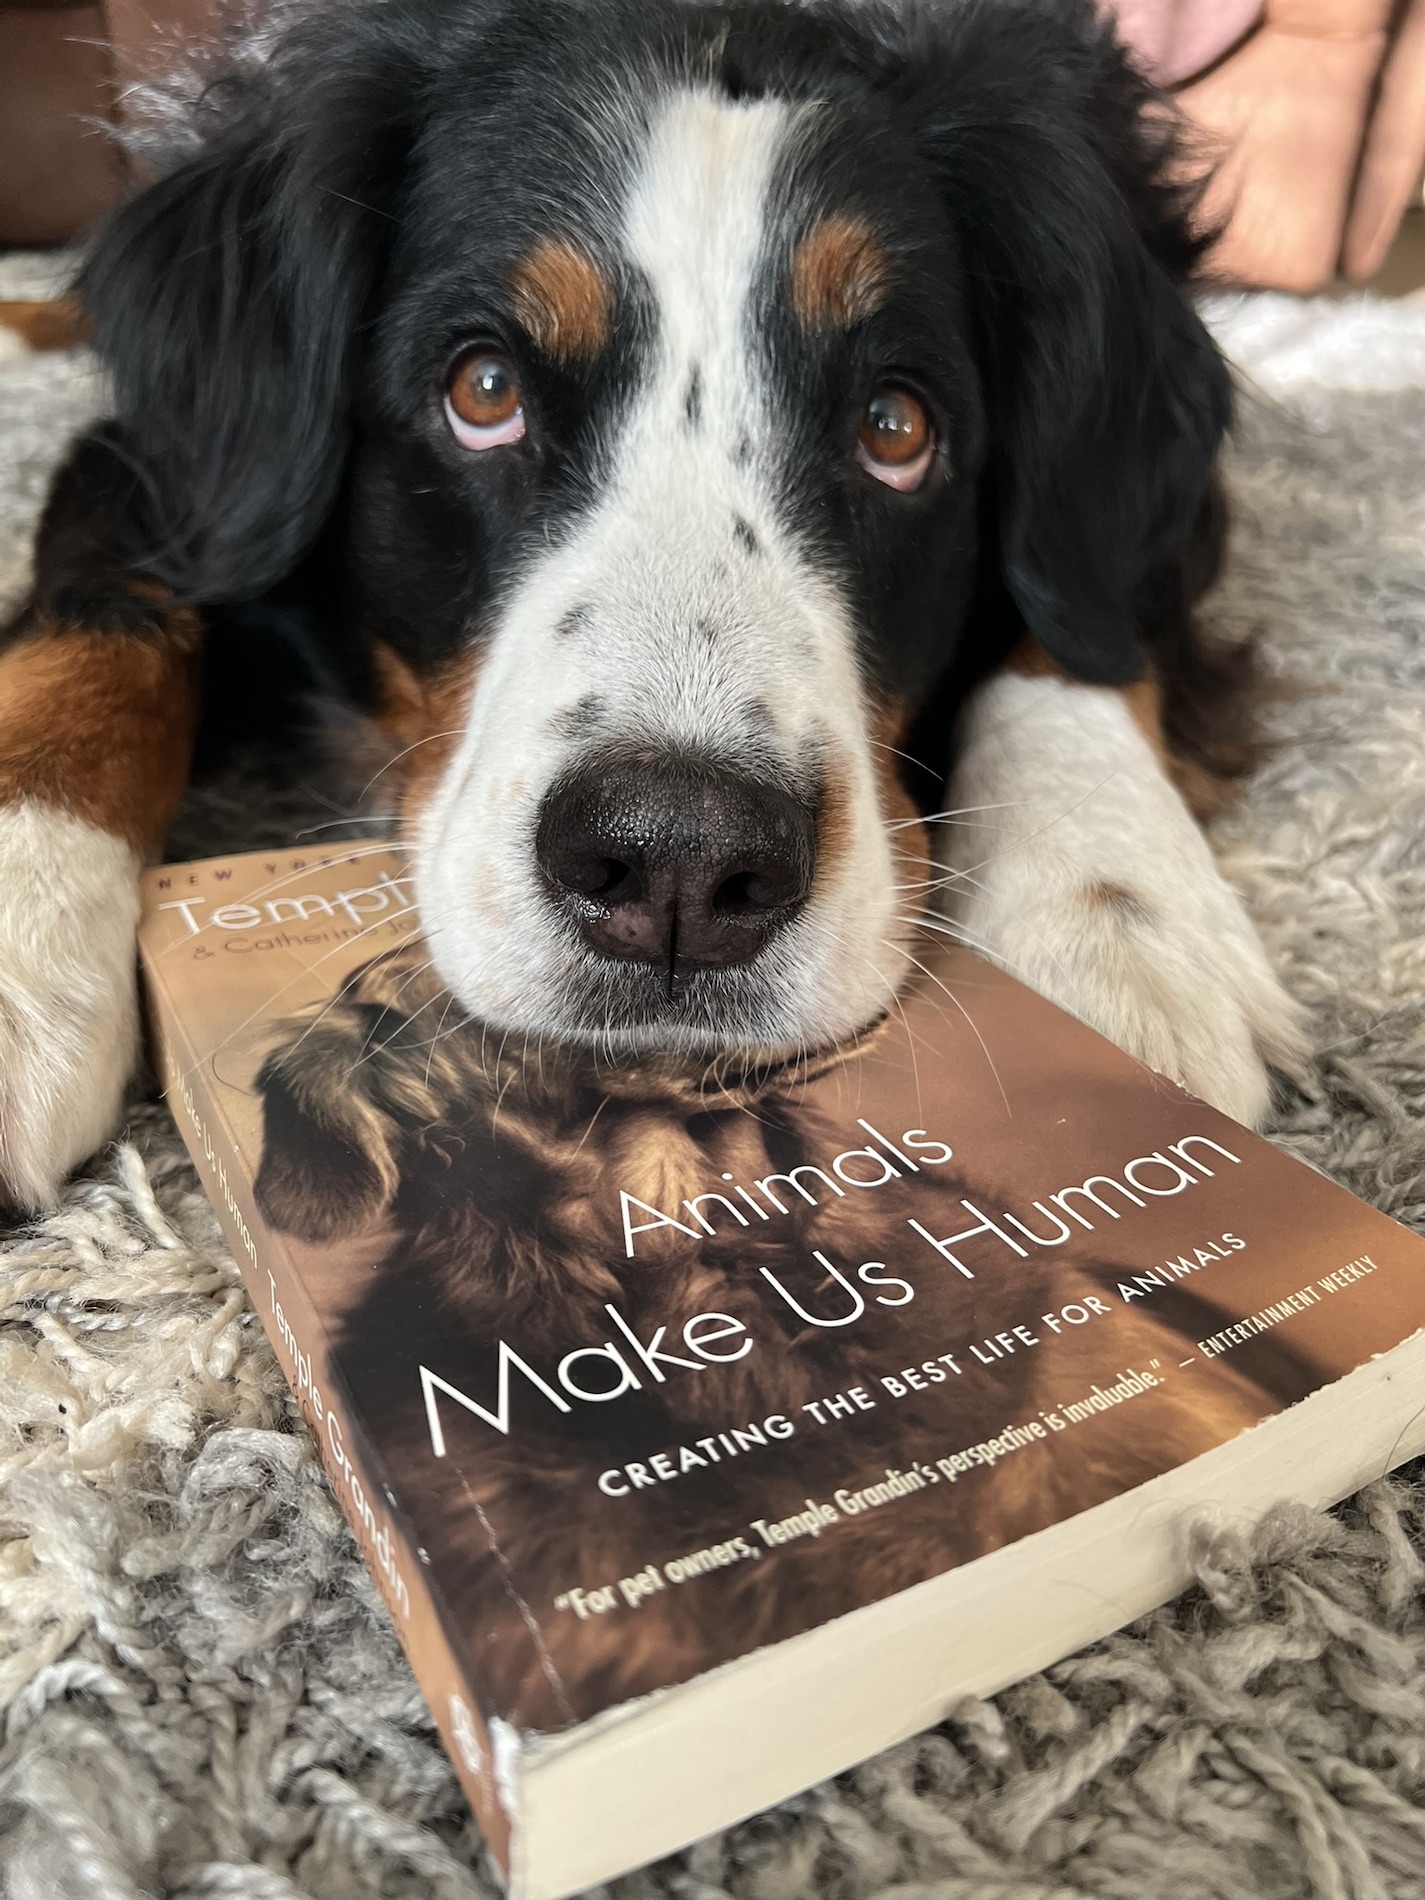 bernese mountain dog resting chin on book